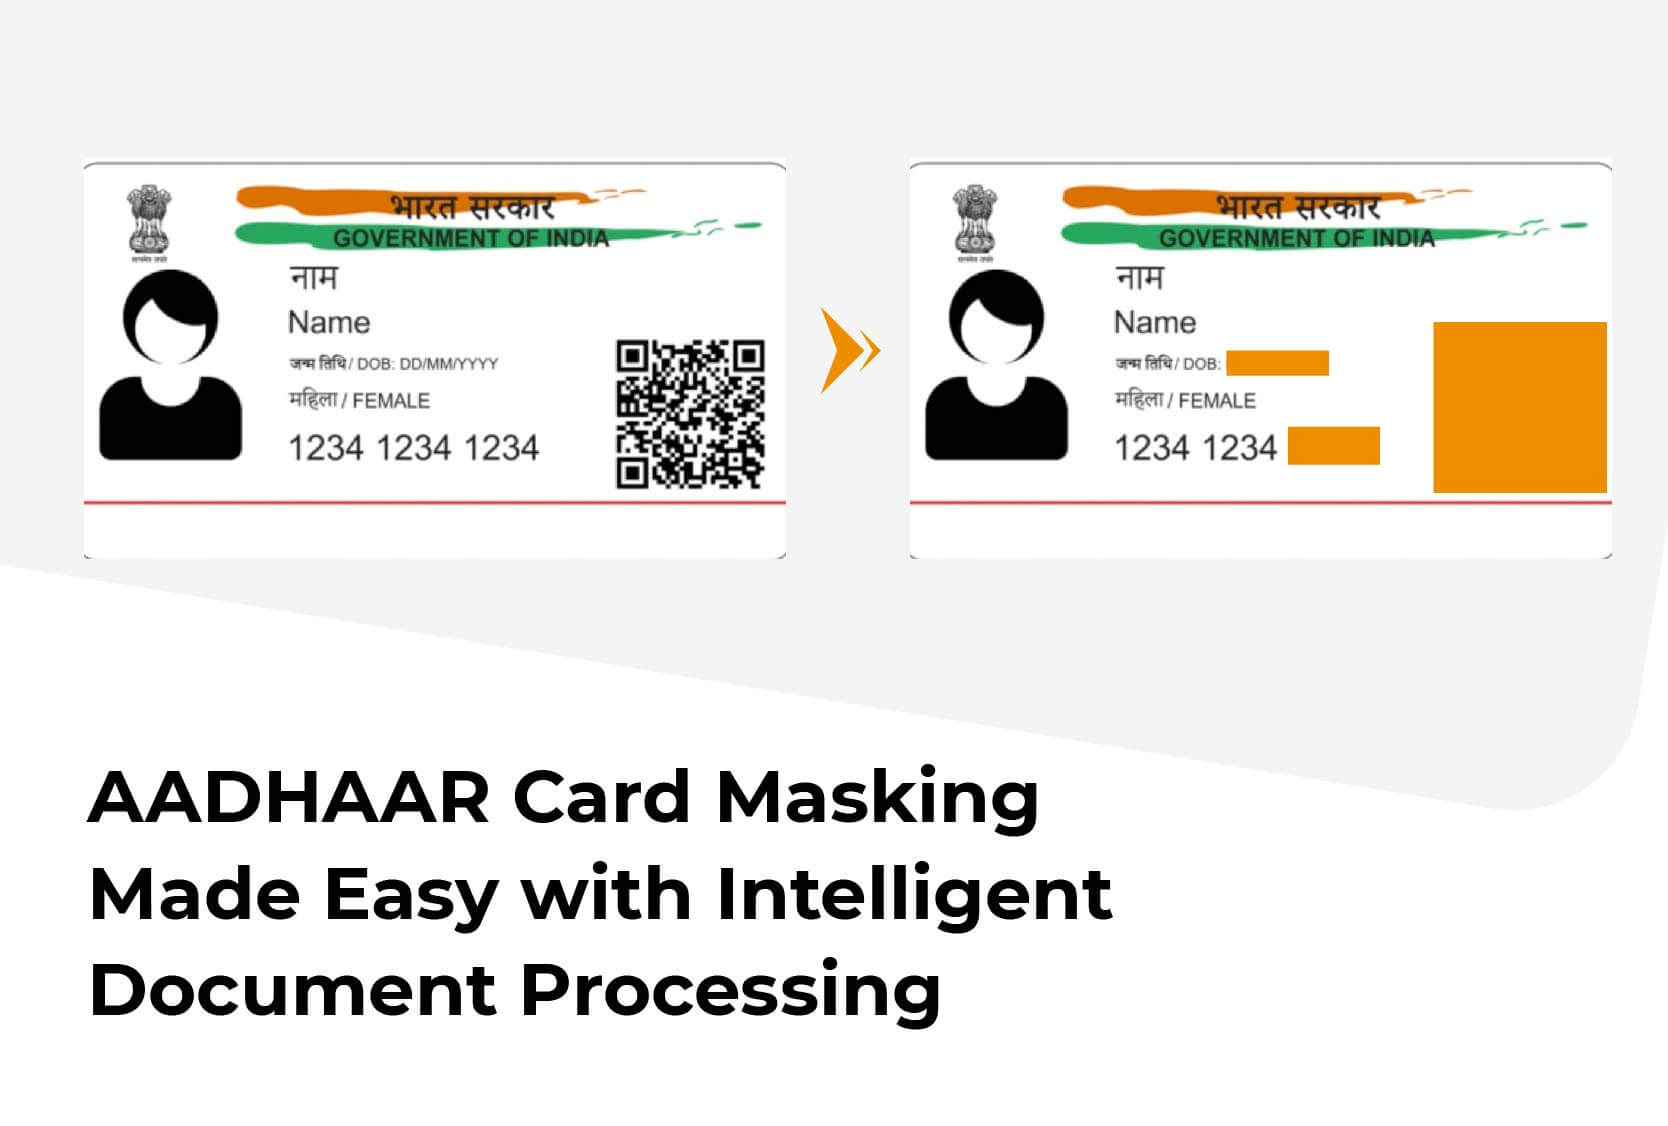 AADHAAR Card Masking Made Easy with Intelligent Document Processing